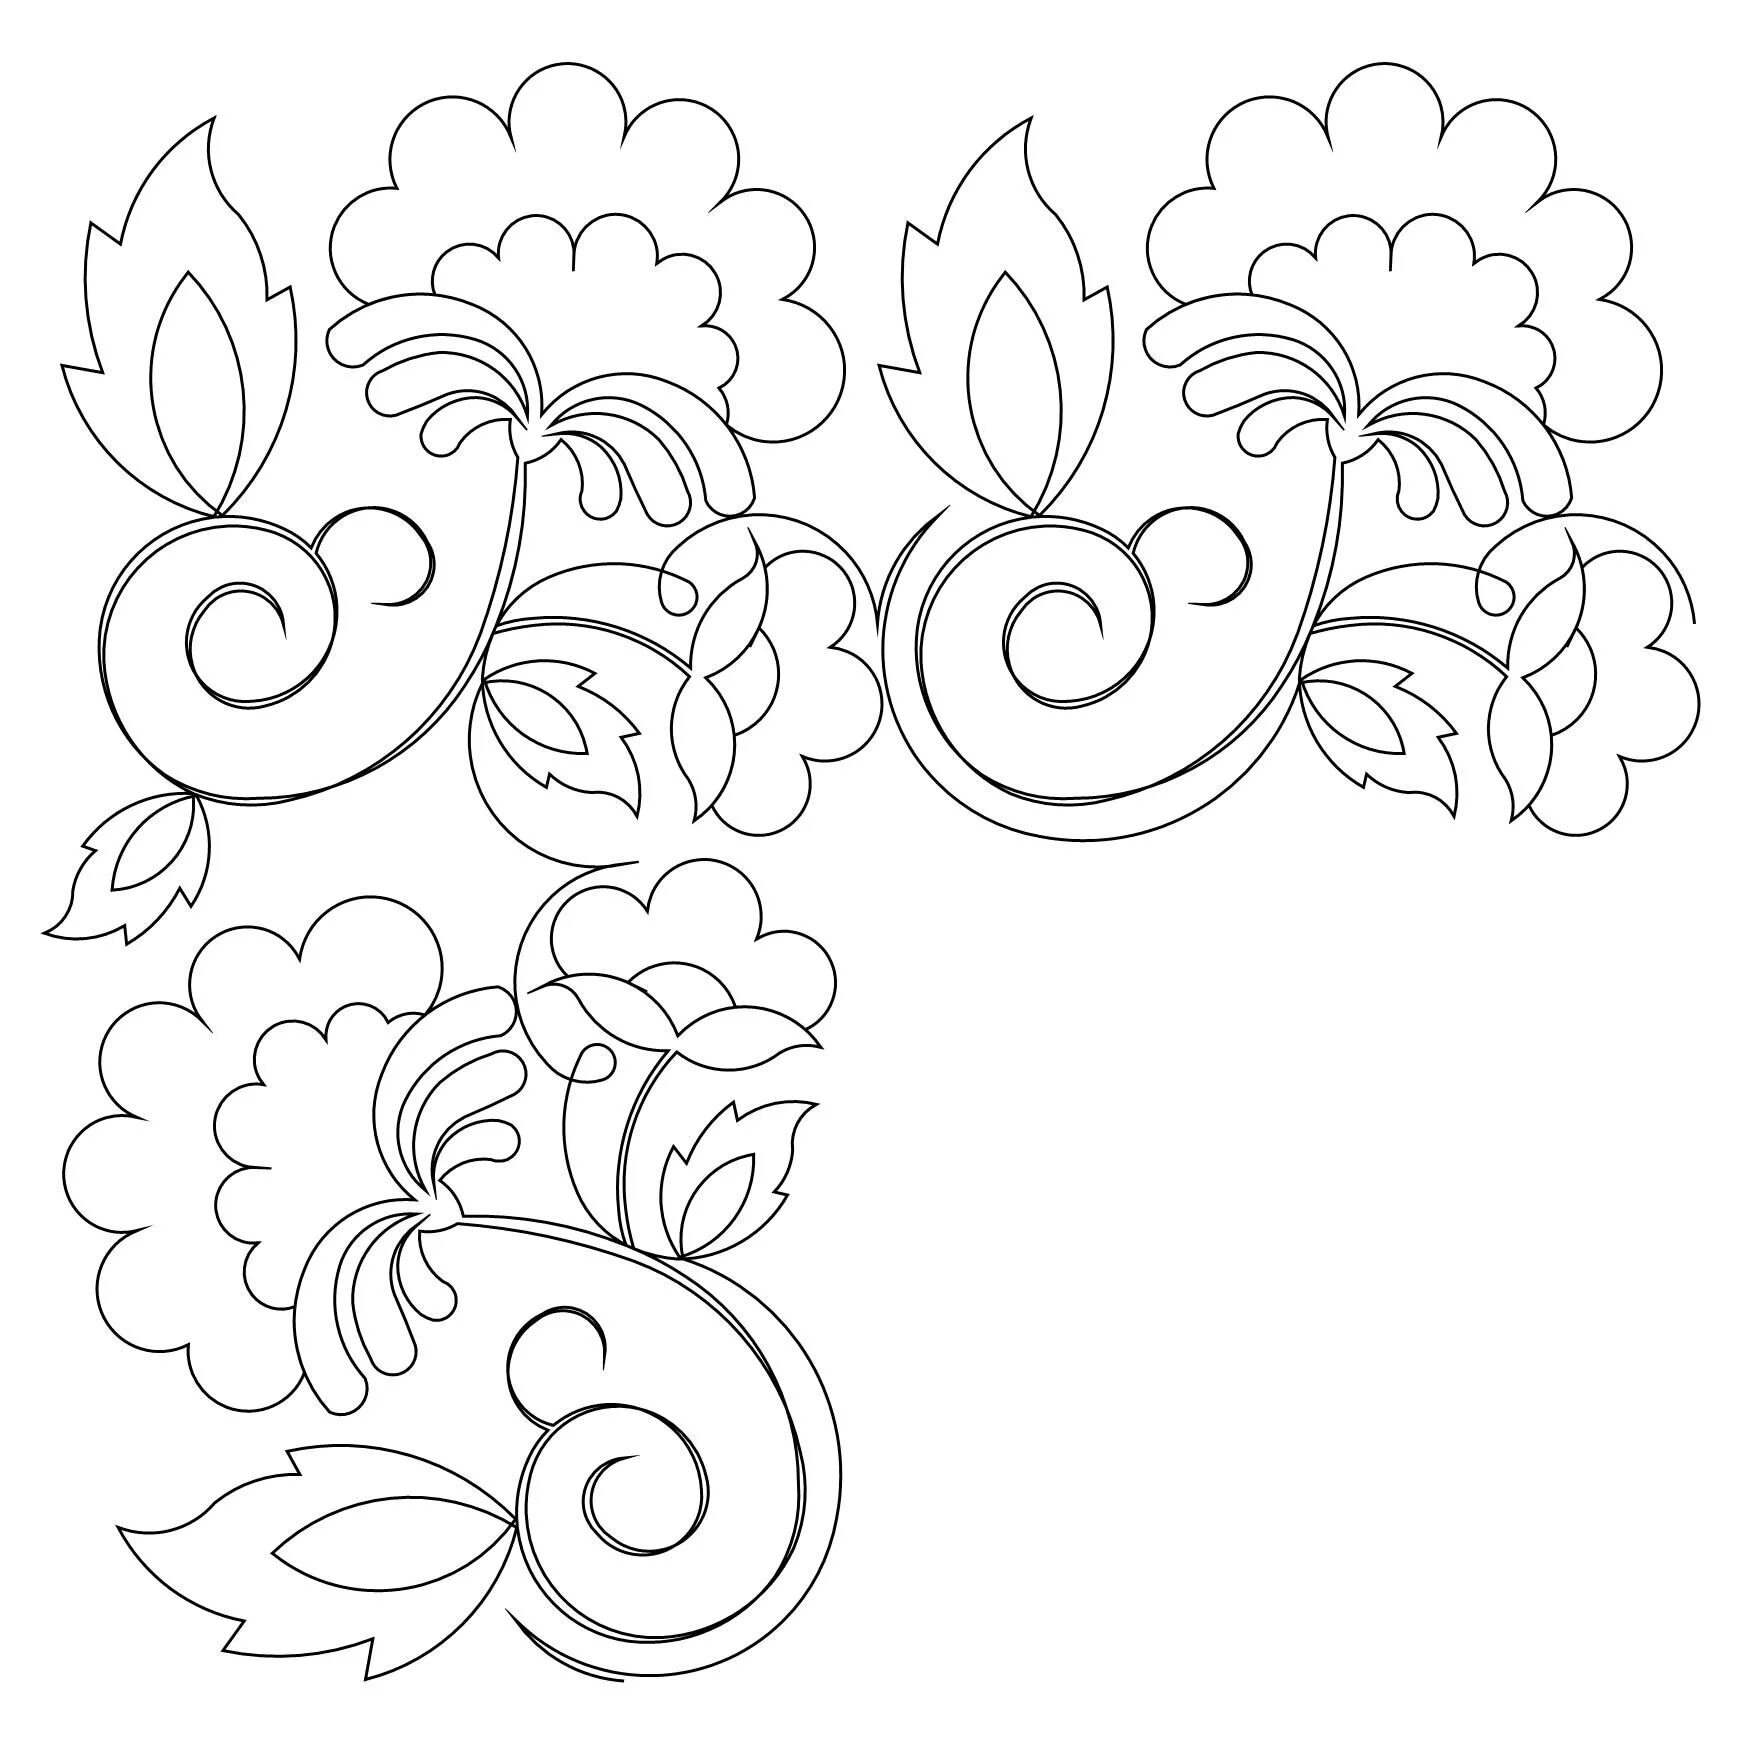 Coloring page glorious russian ornament